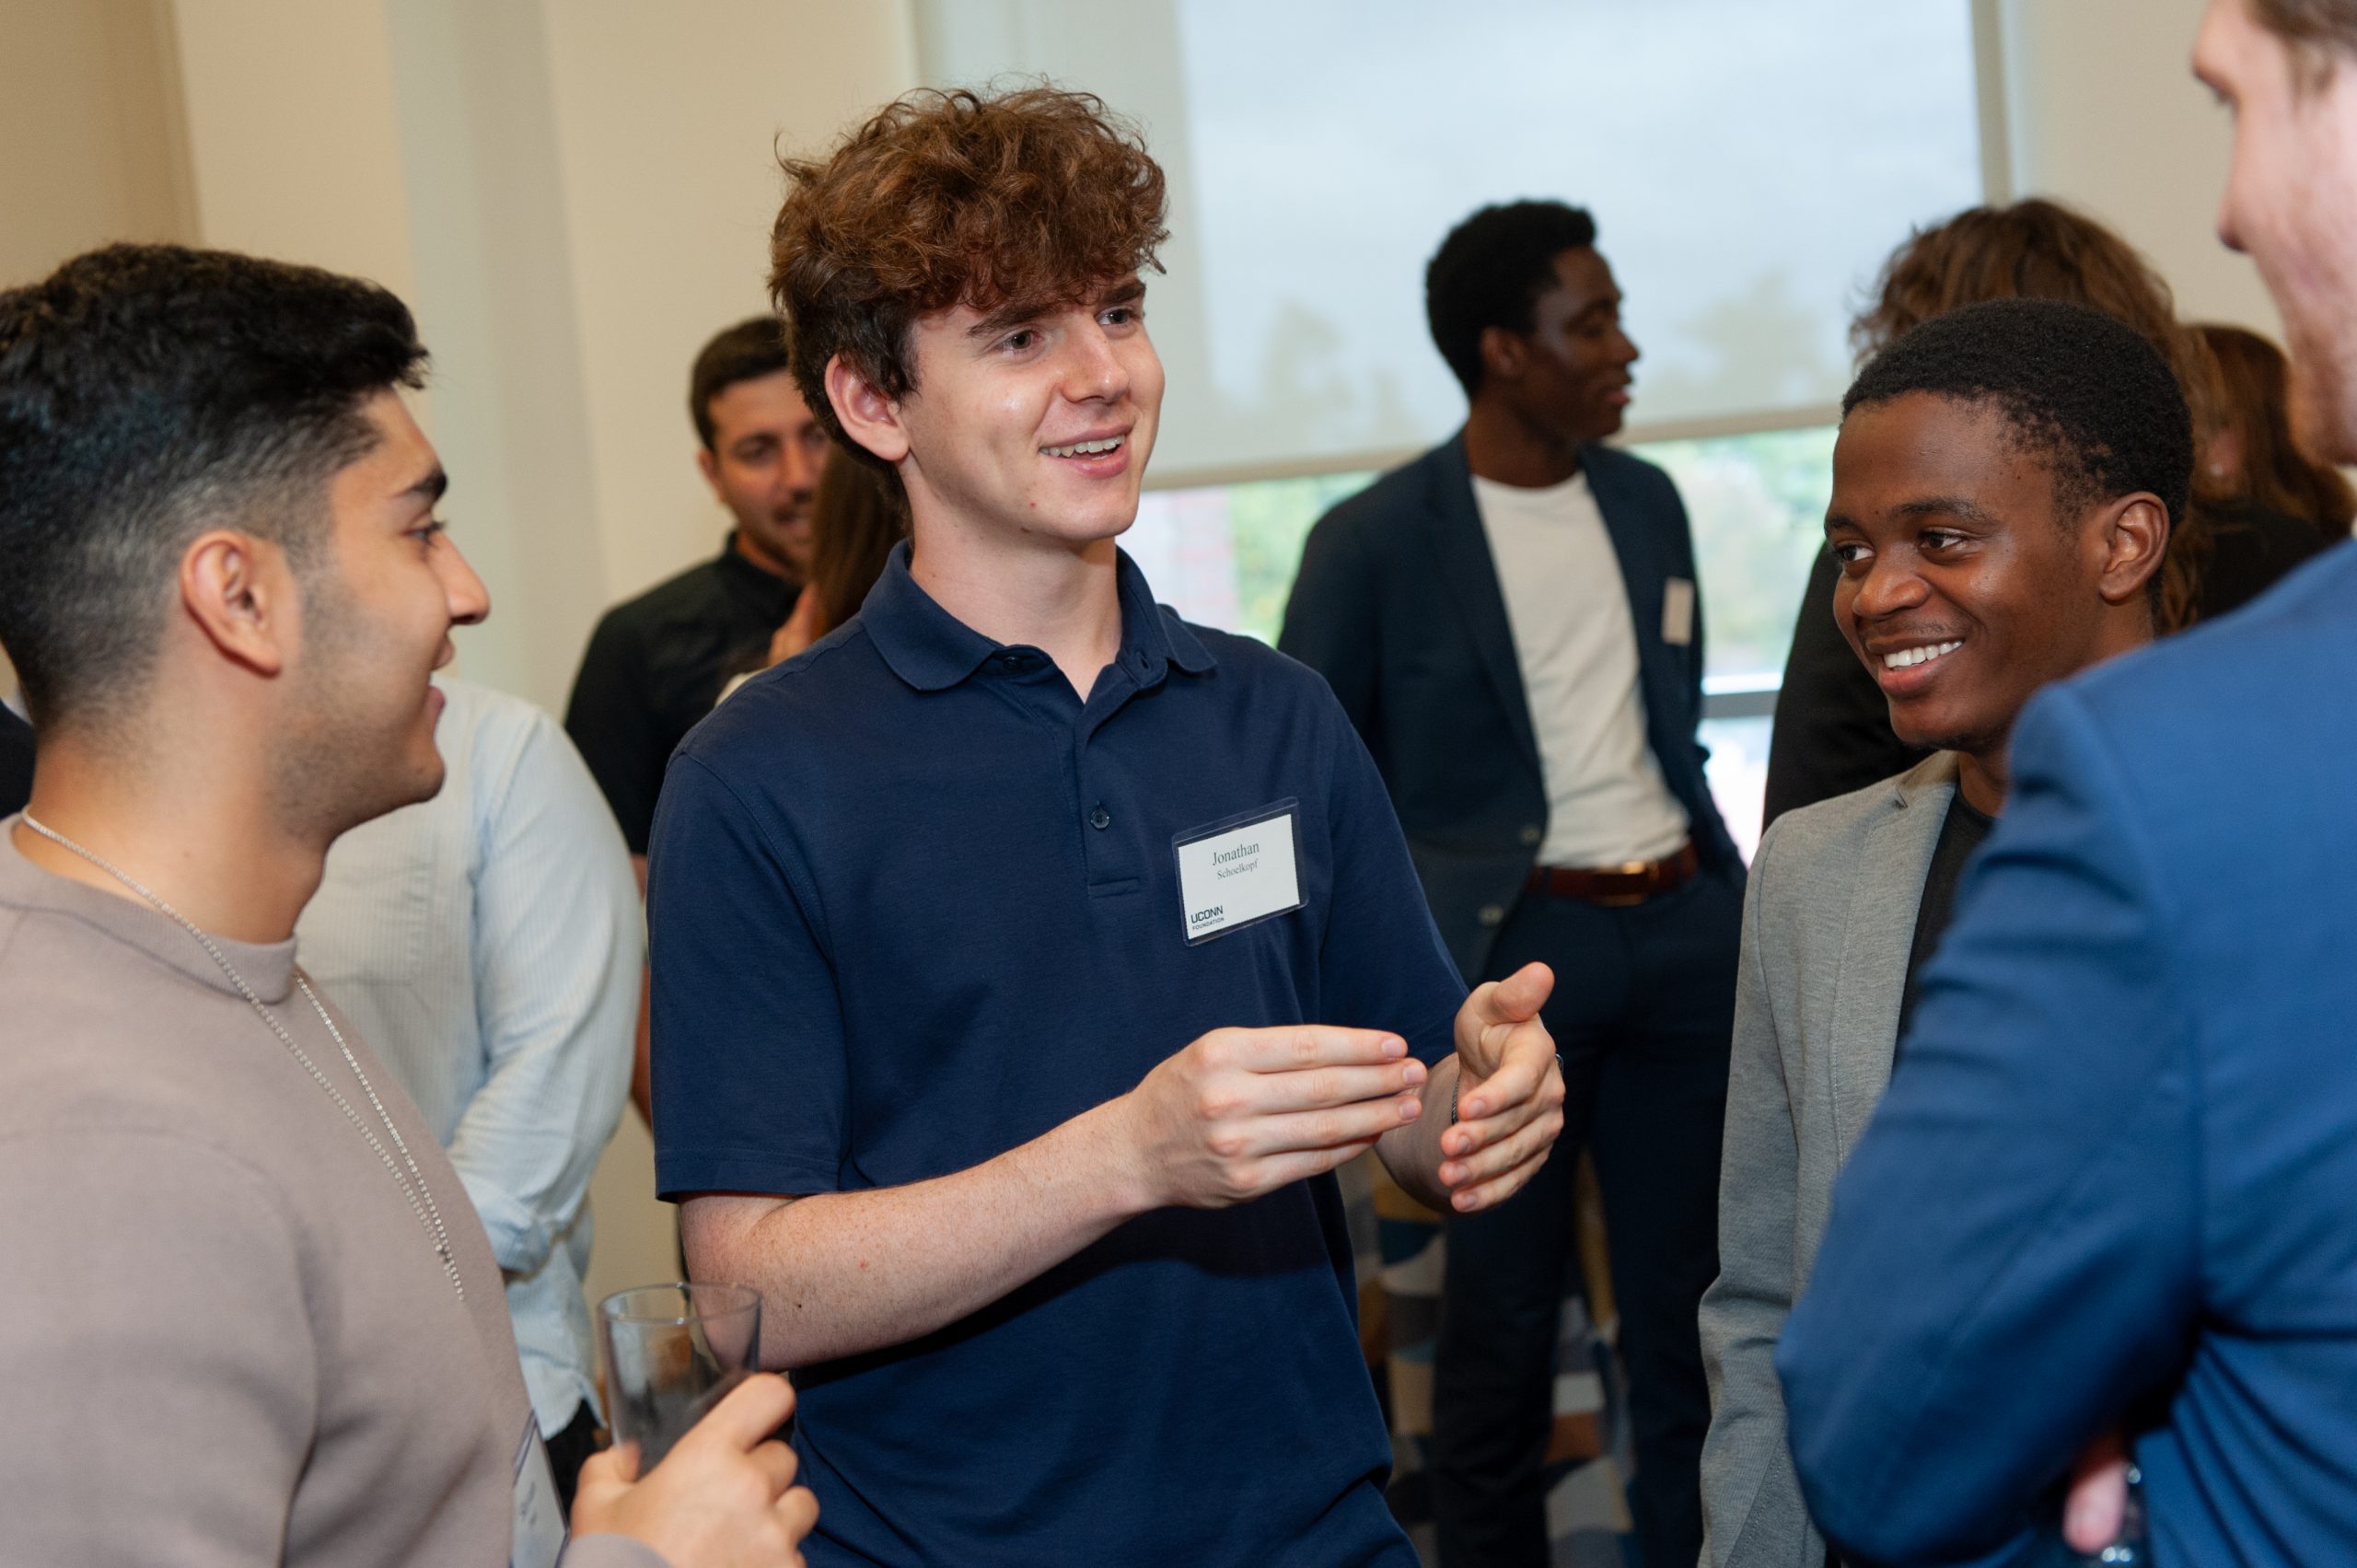 Students network with each other at an event.